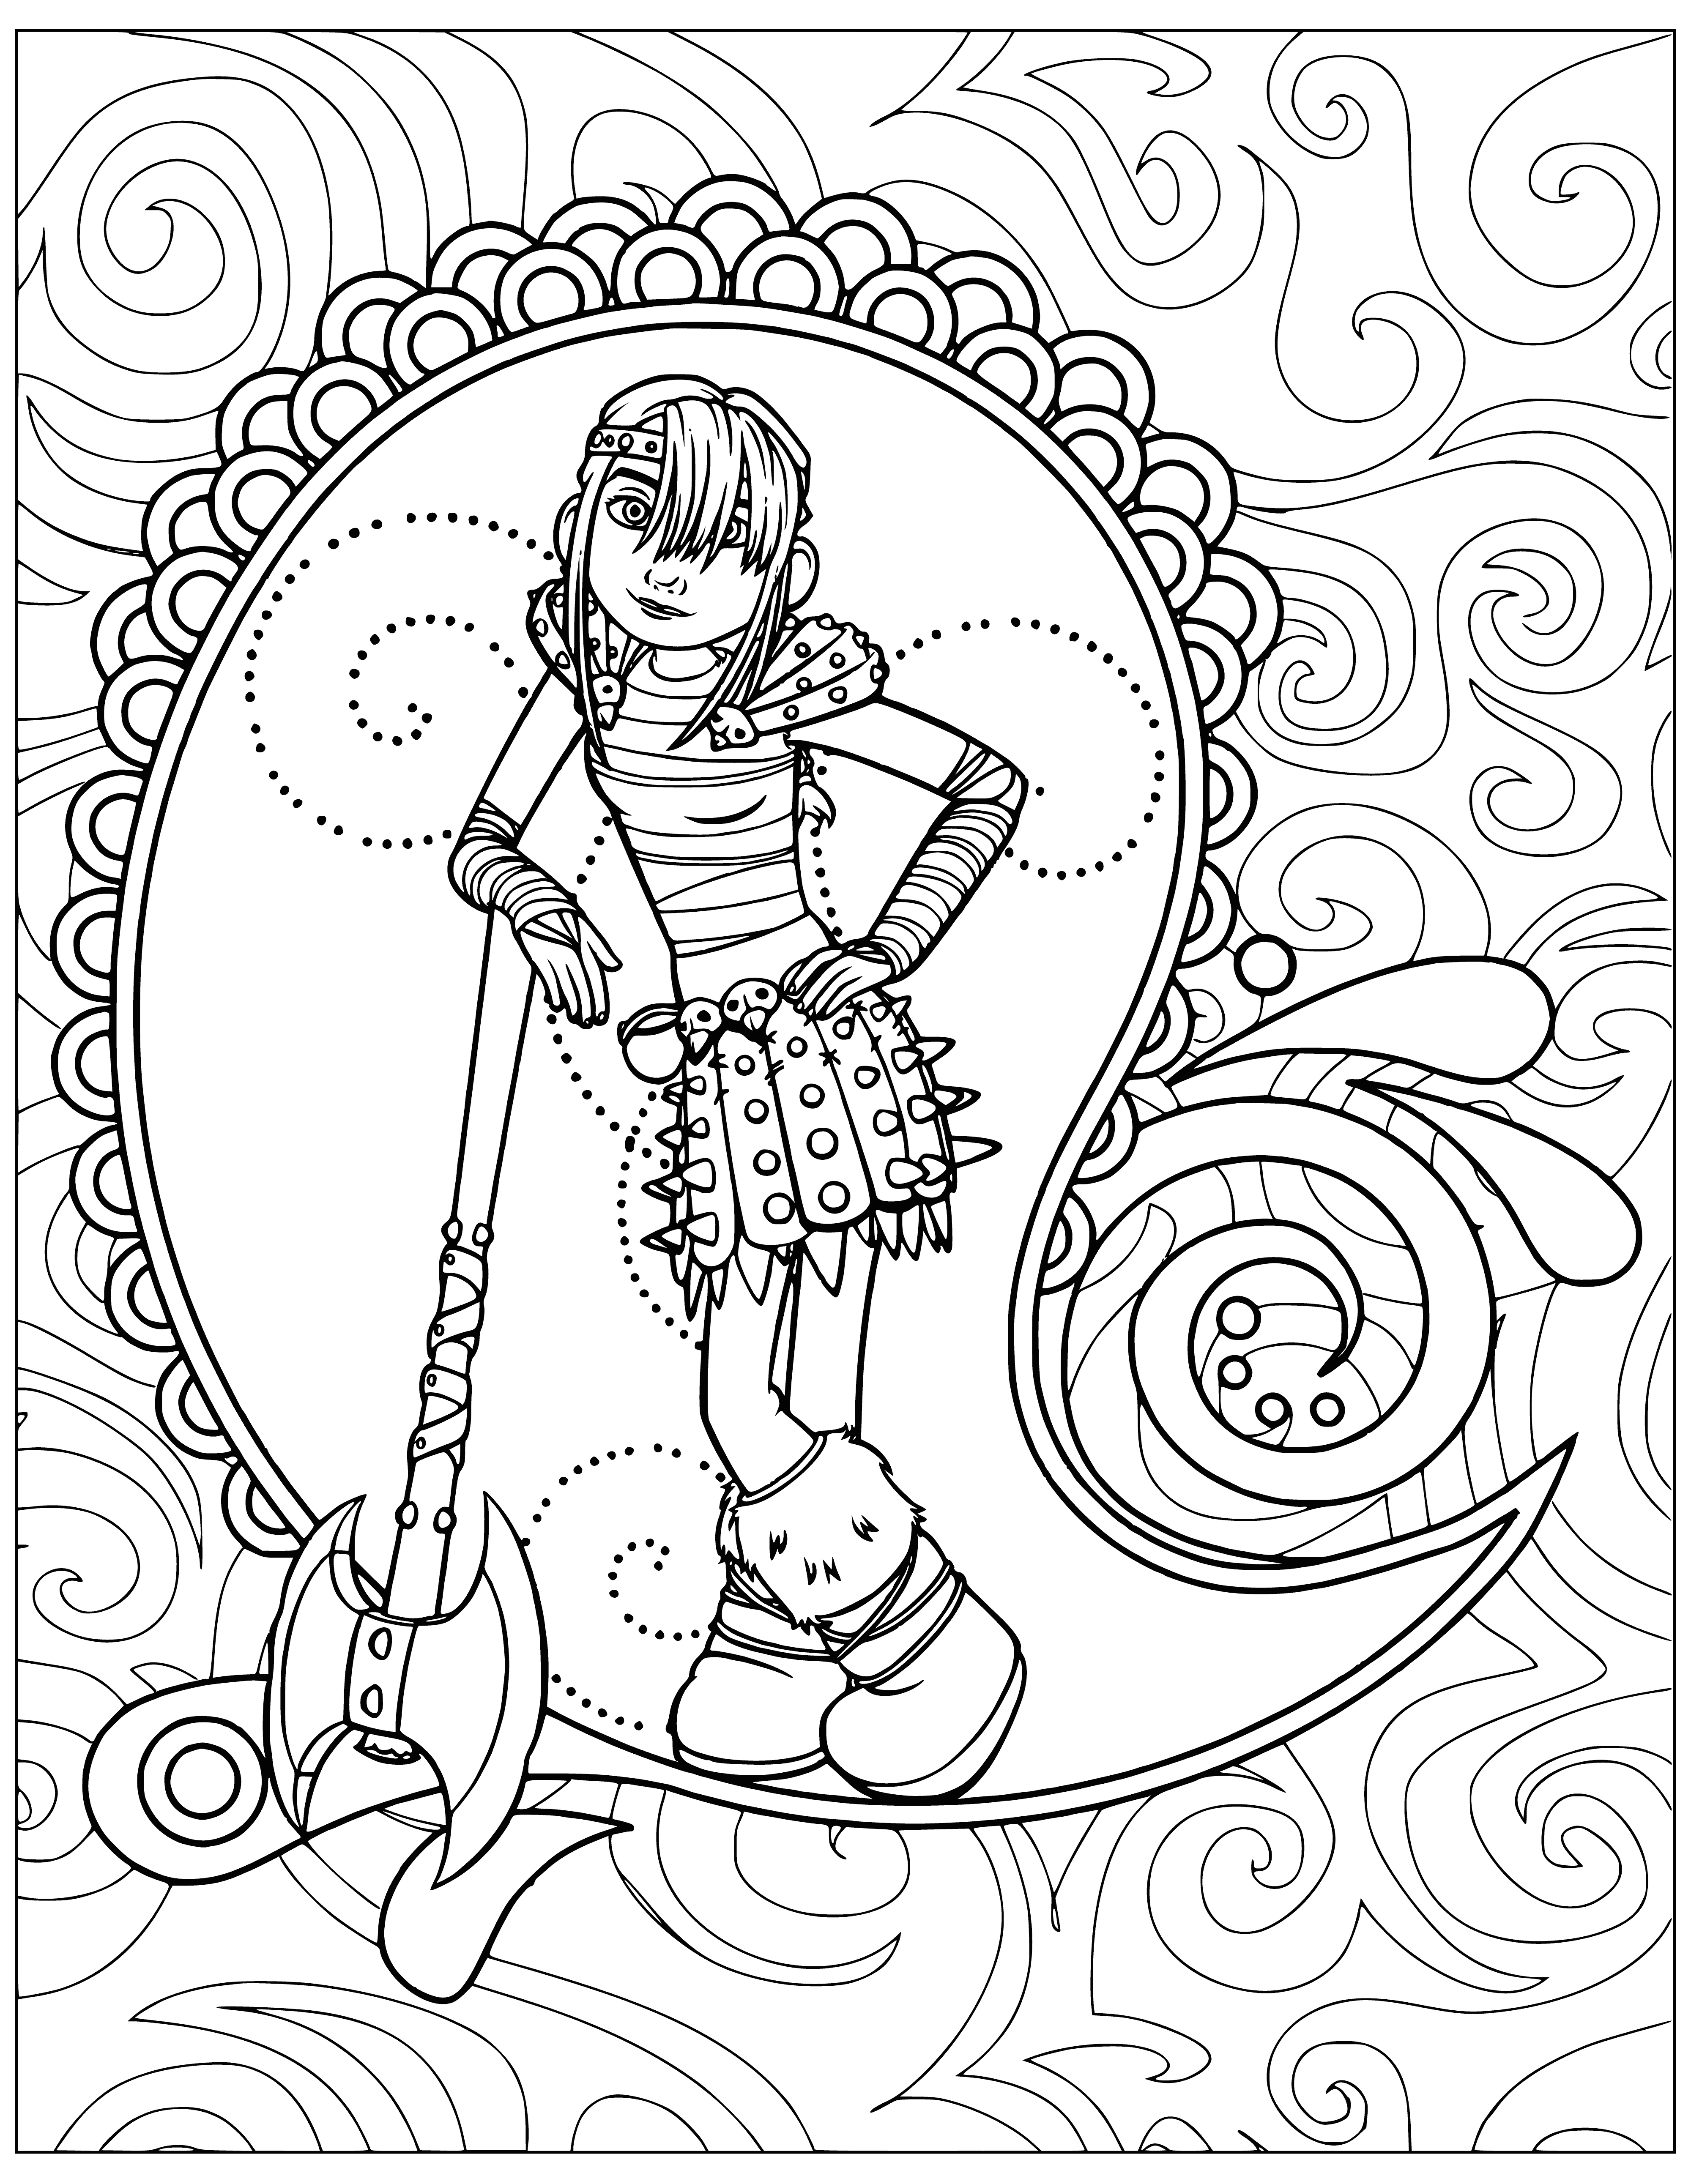 Astrid coloring page